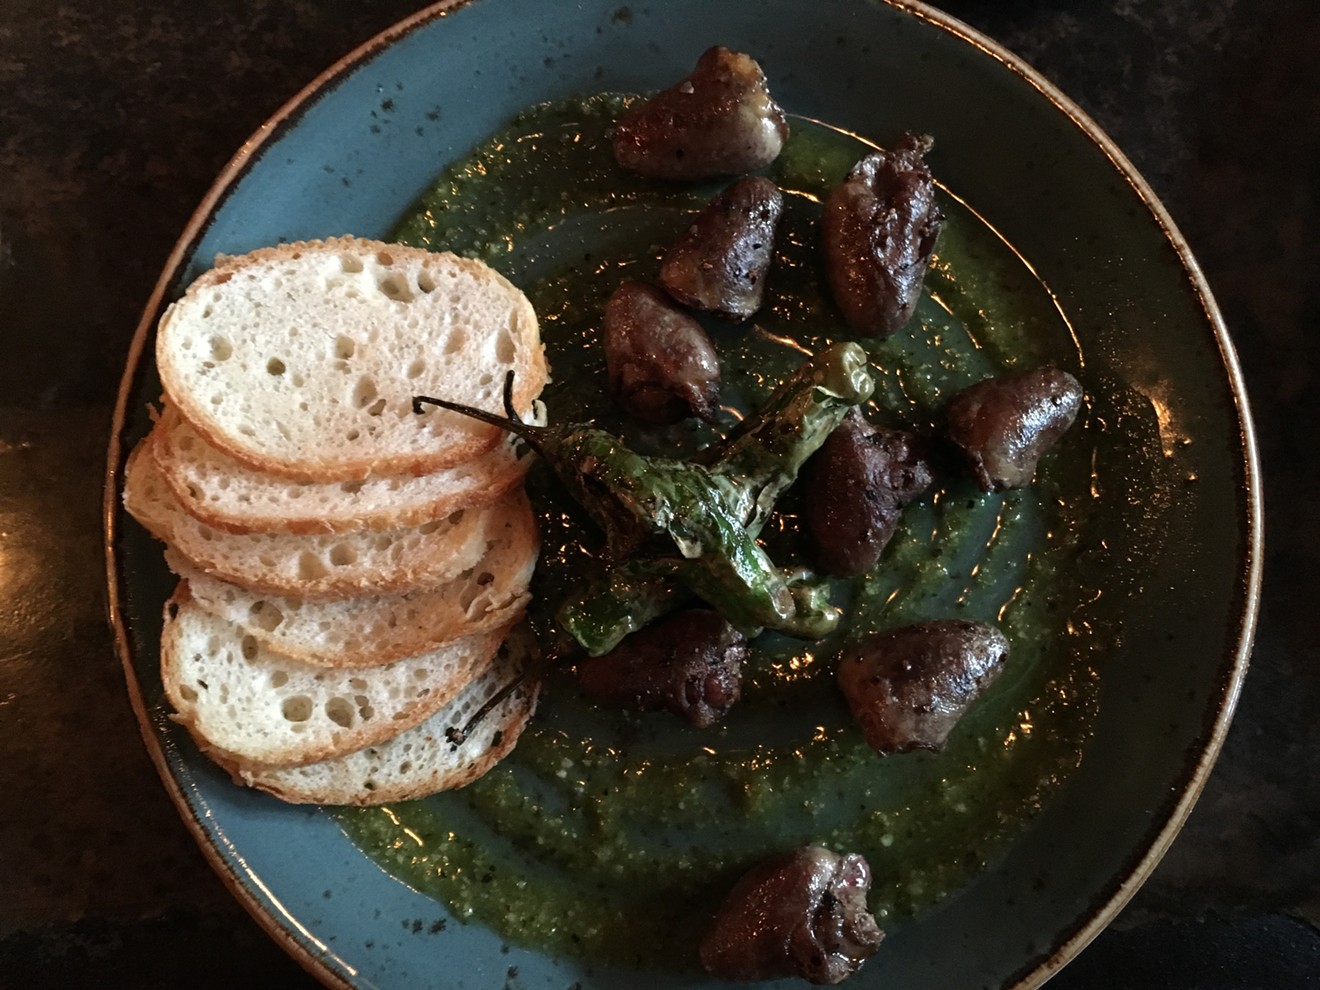 Duck hearts at Armoury D.E. are $12.